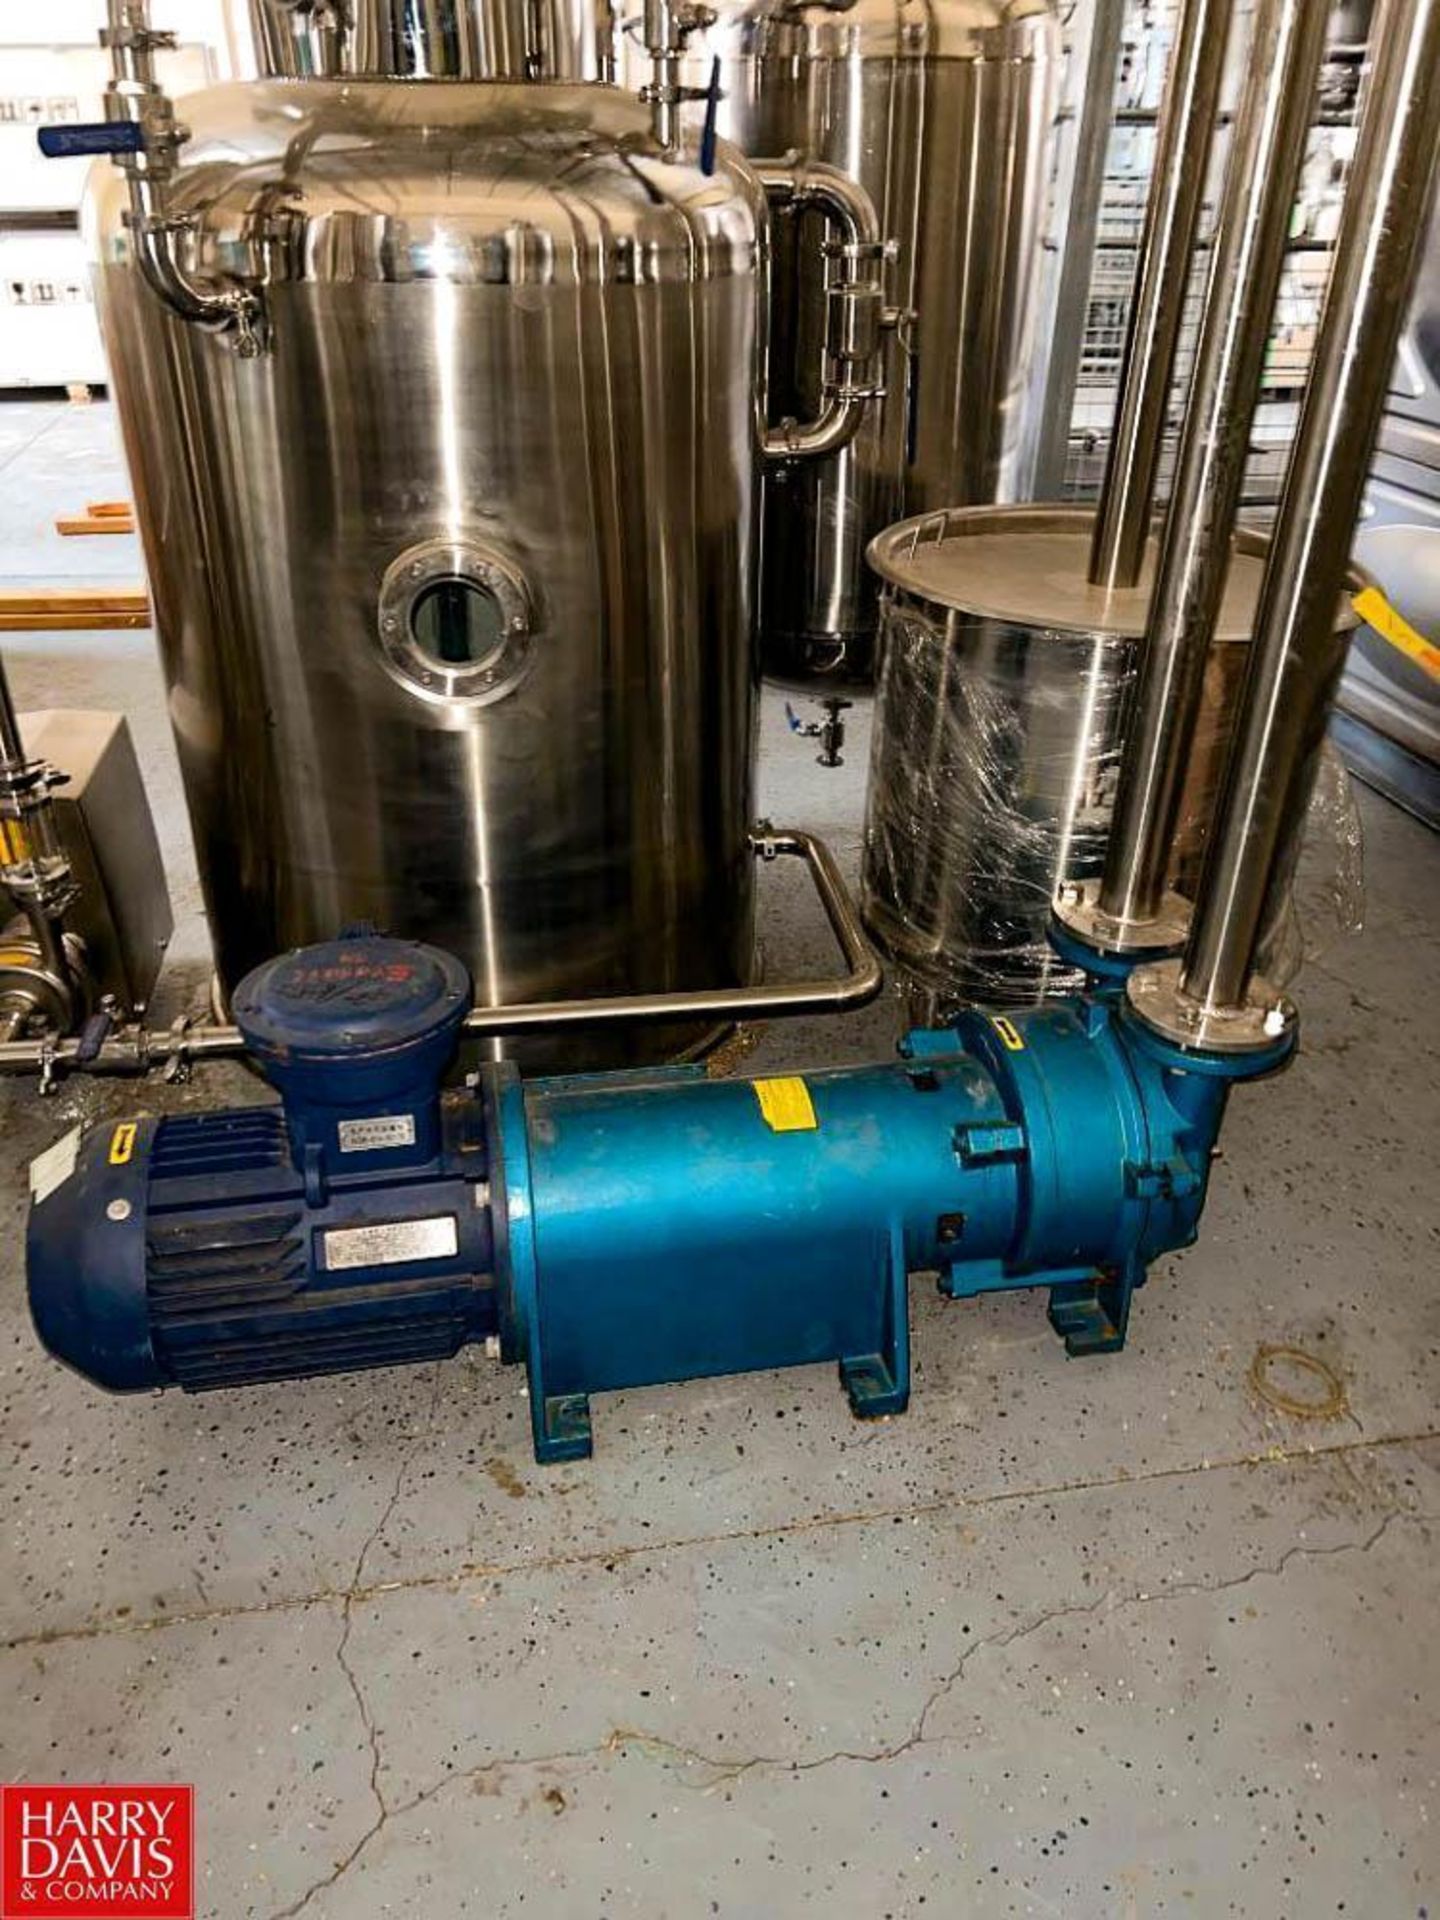 NEW Vacuum Pump and Water/Buffer - Rigging Fee: $1,500